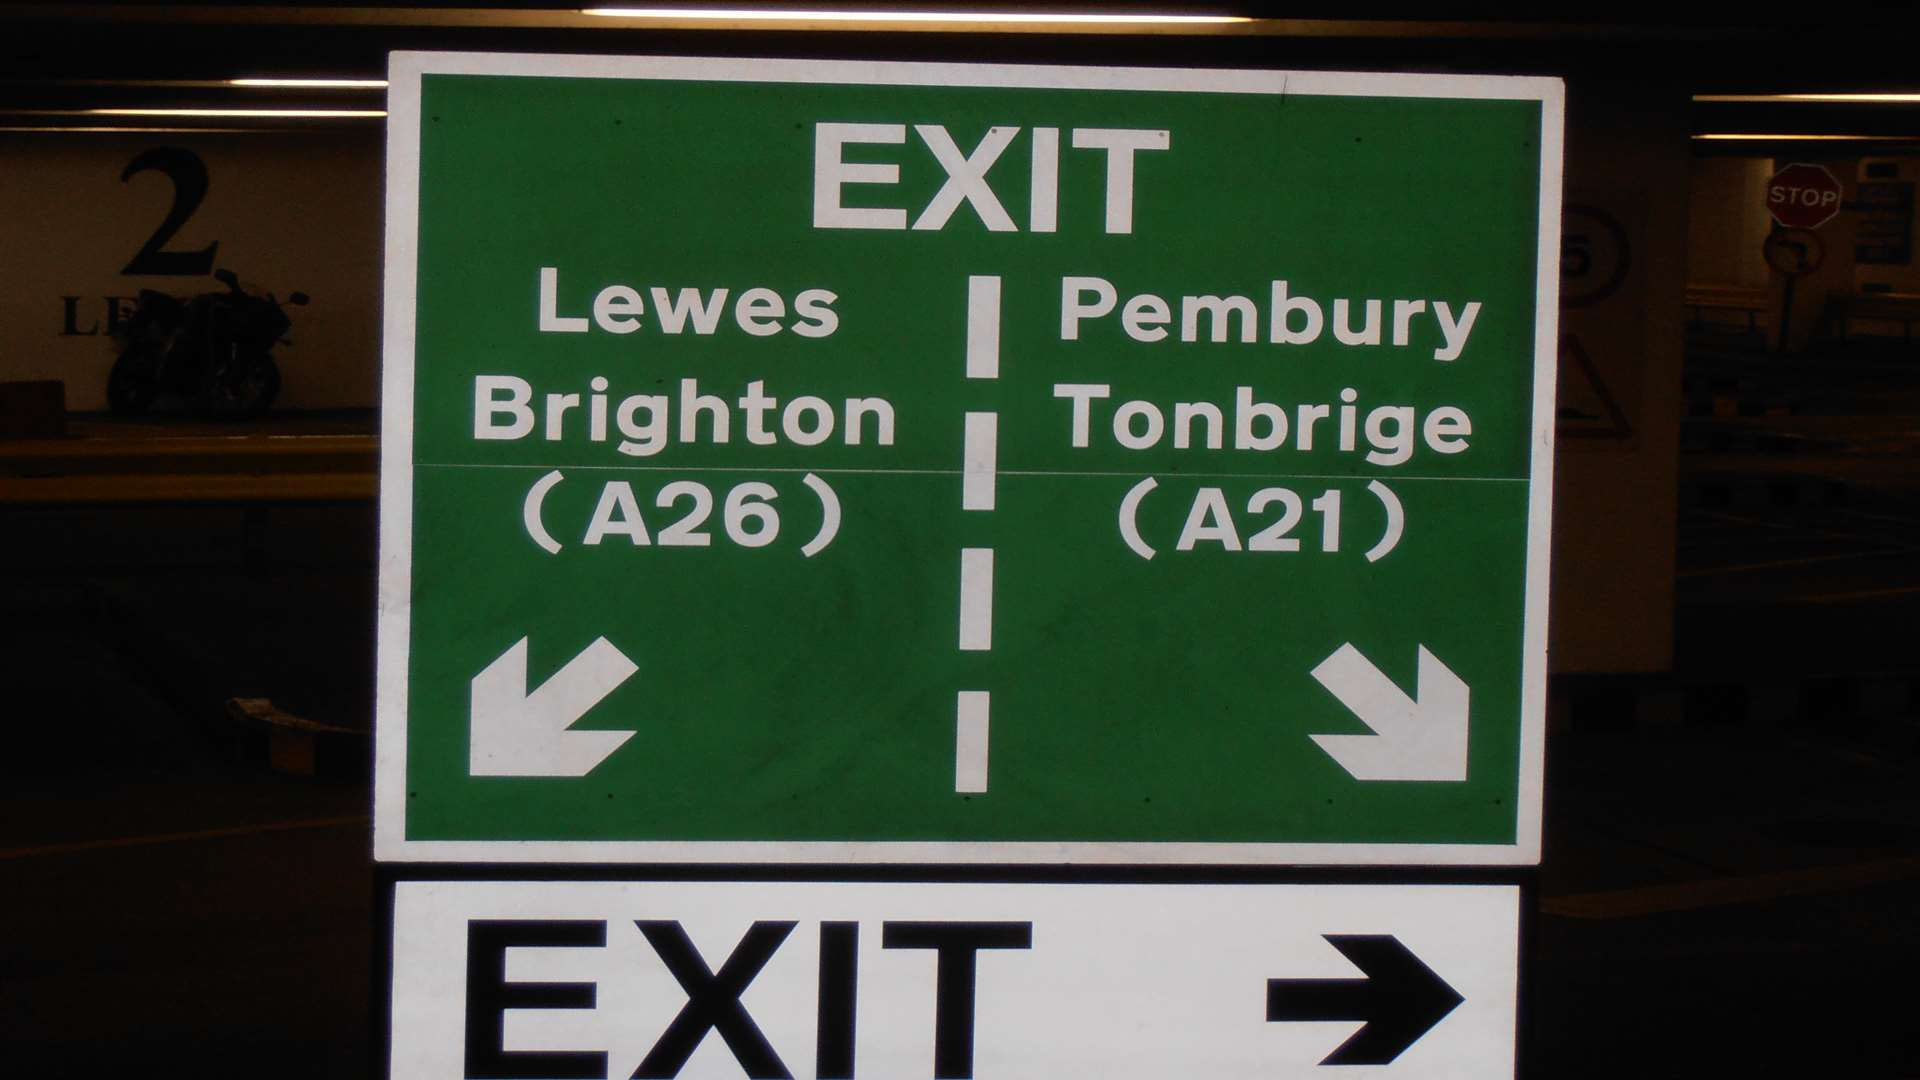 A road sign misses a letter from the spelling of Tonbridge. Picture: Bruce Grant